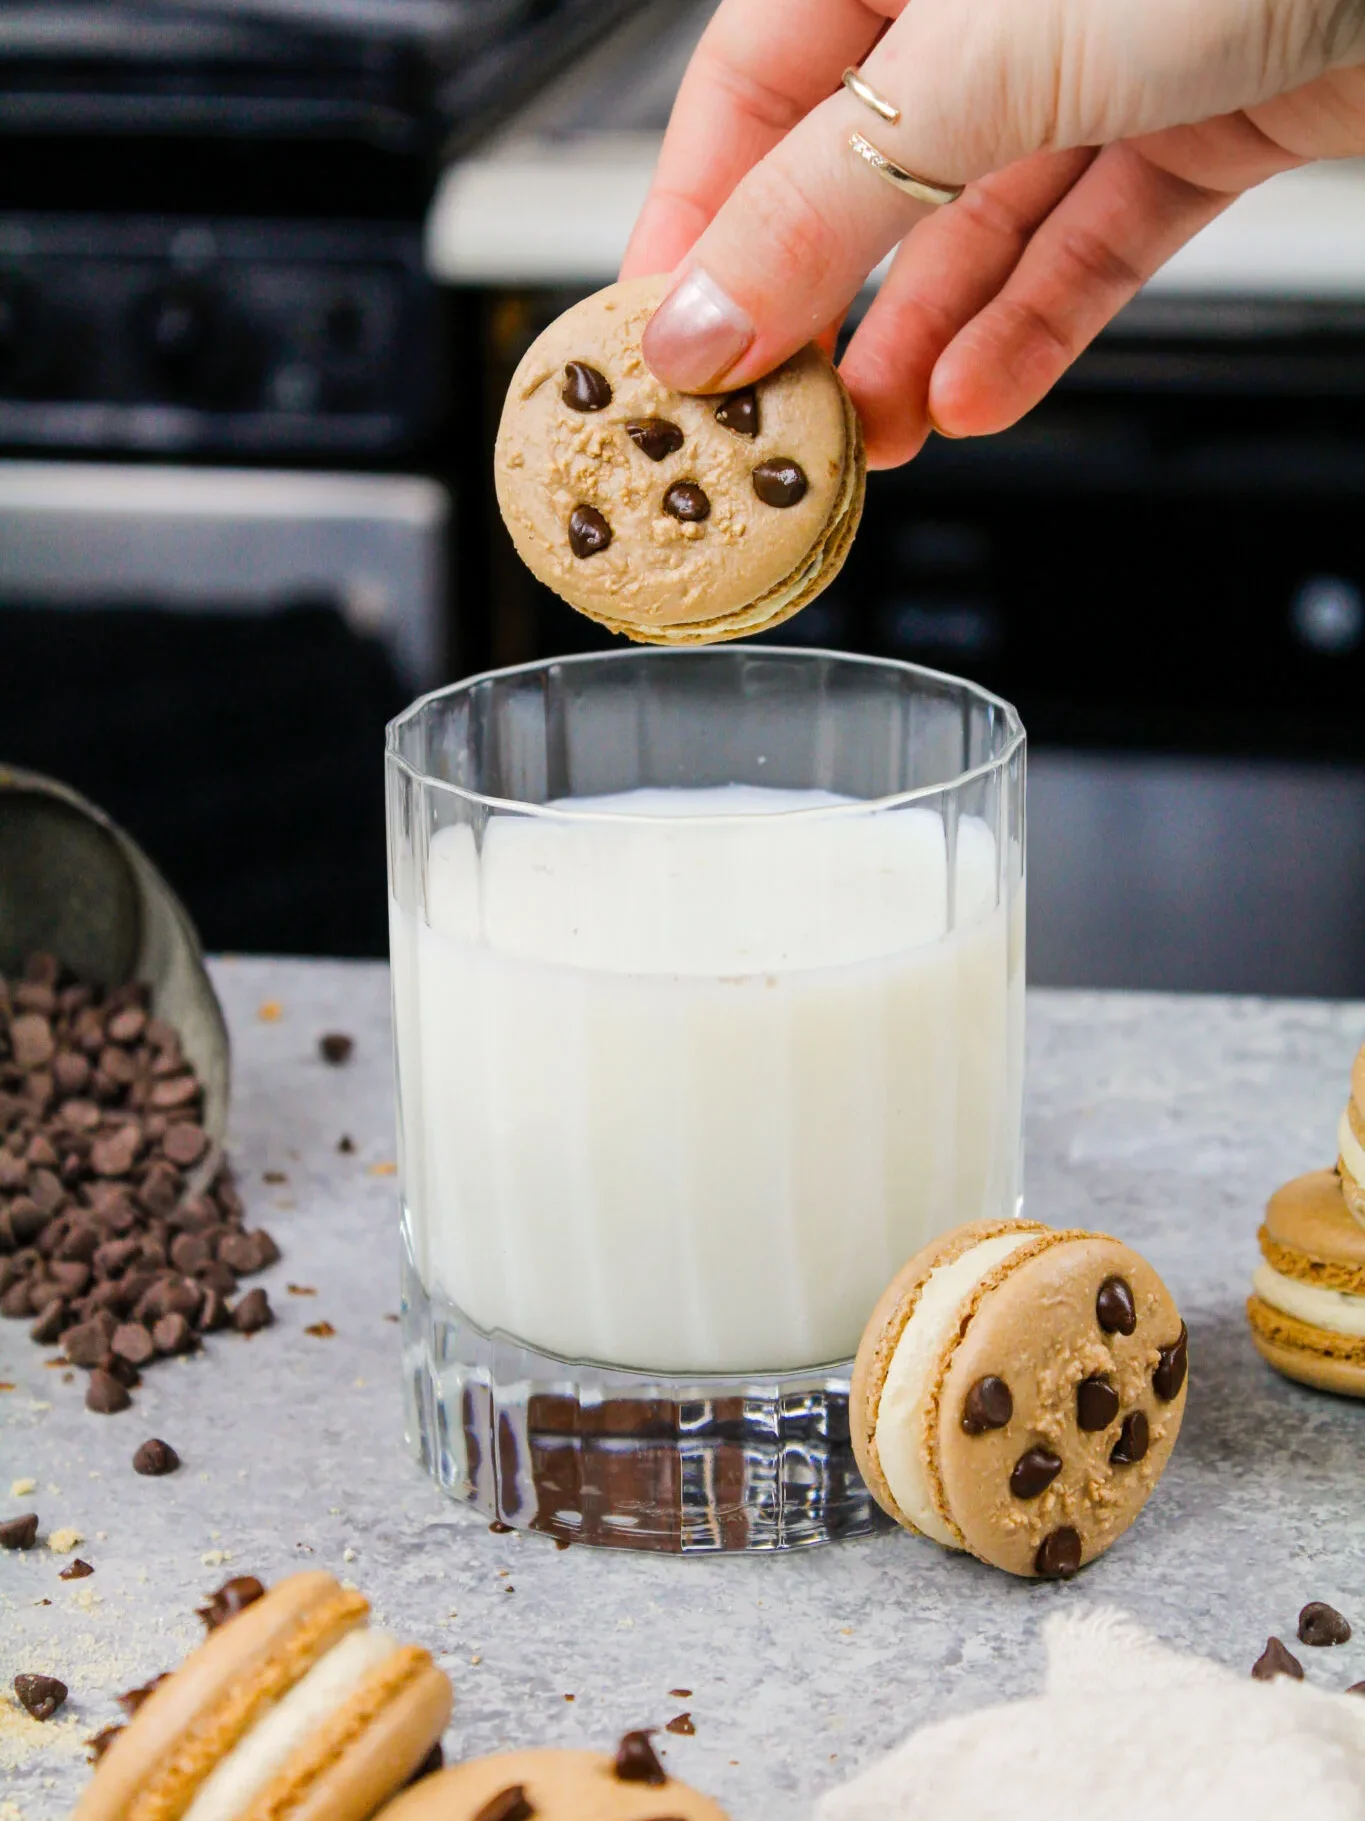 image of a cookie dough macaron being dipped into a glass of milk that was shared as part of a macaron round up post
